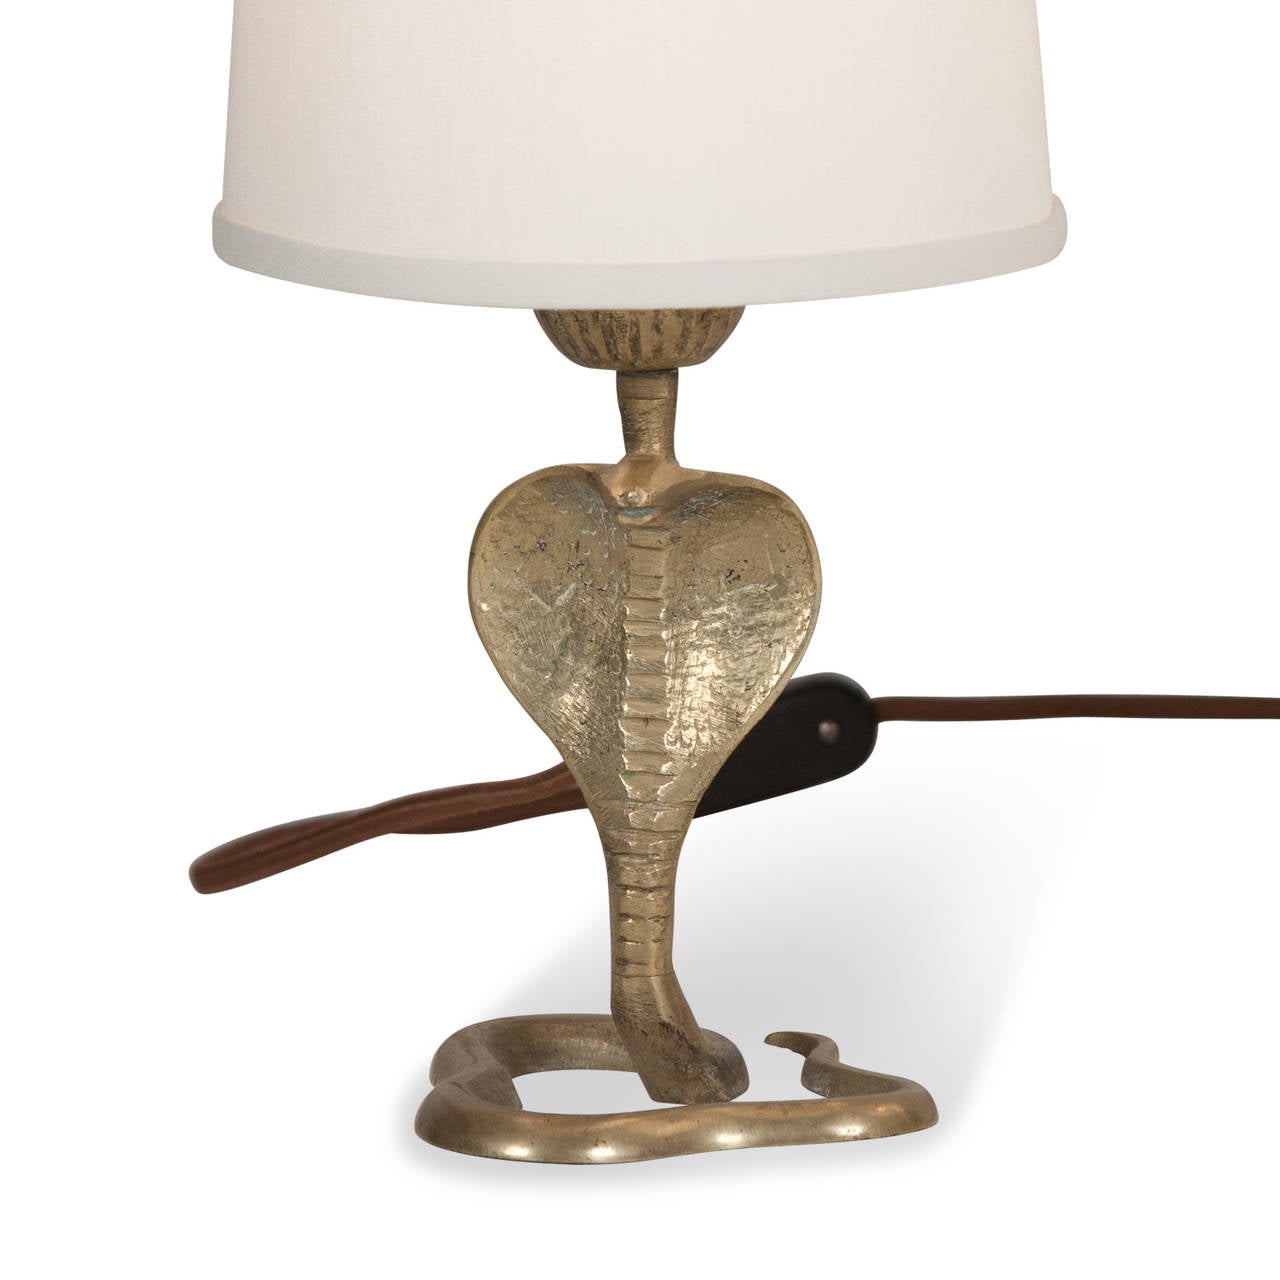 Pair of bronze cobra form tables lamps, the serpent standing with hood open, and body loosely coiled, French 1930s. In custom silk shades. Overall height 12 in, diameter of tail 4 in. Shade measures top diameter 5 in, bottom diameter 6 in, height 5